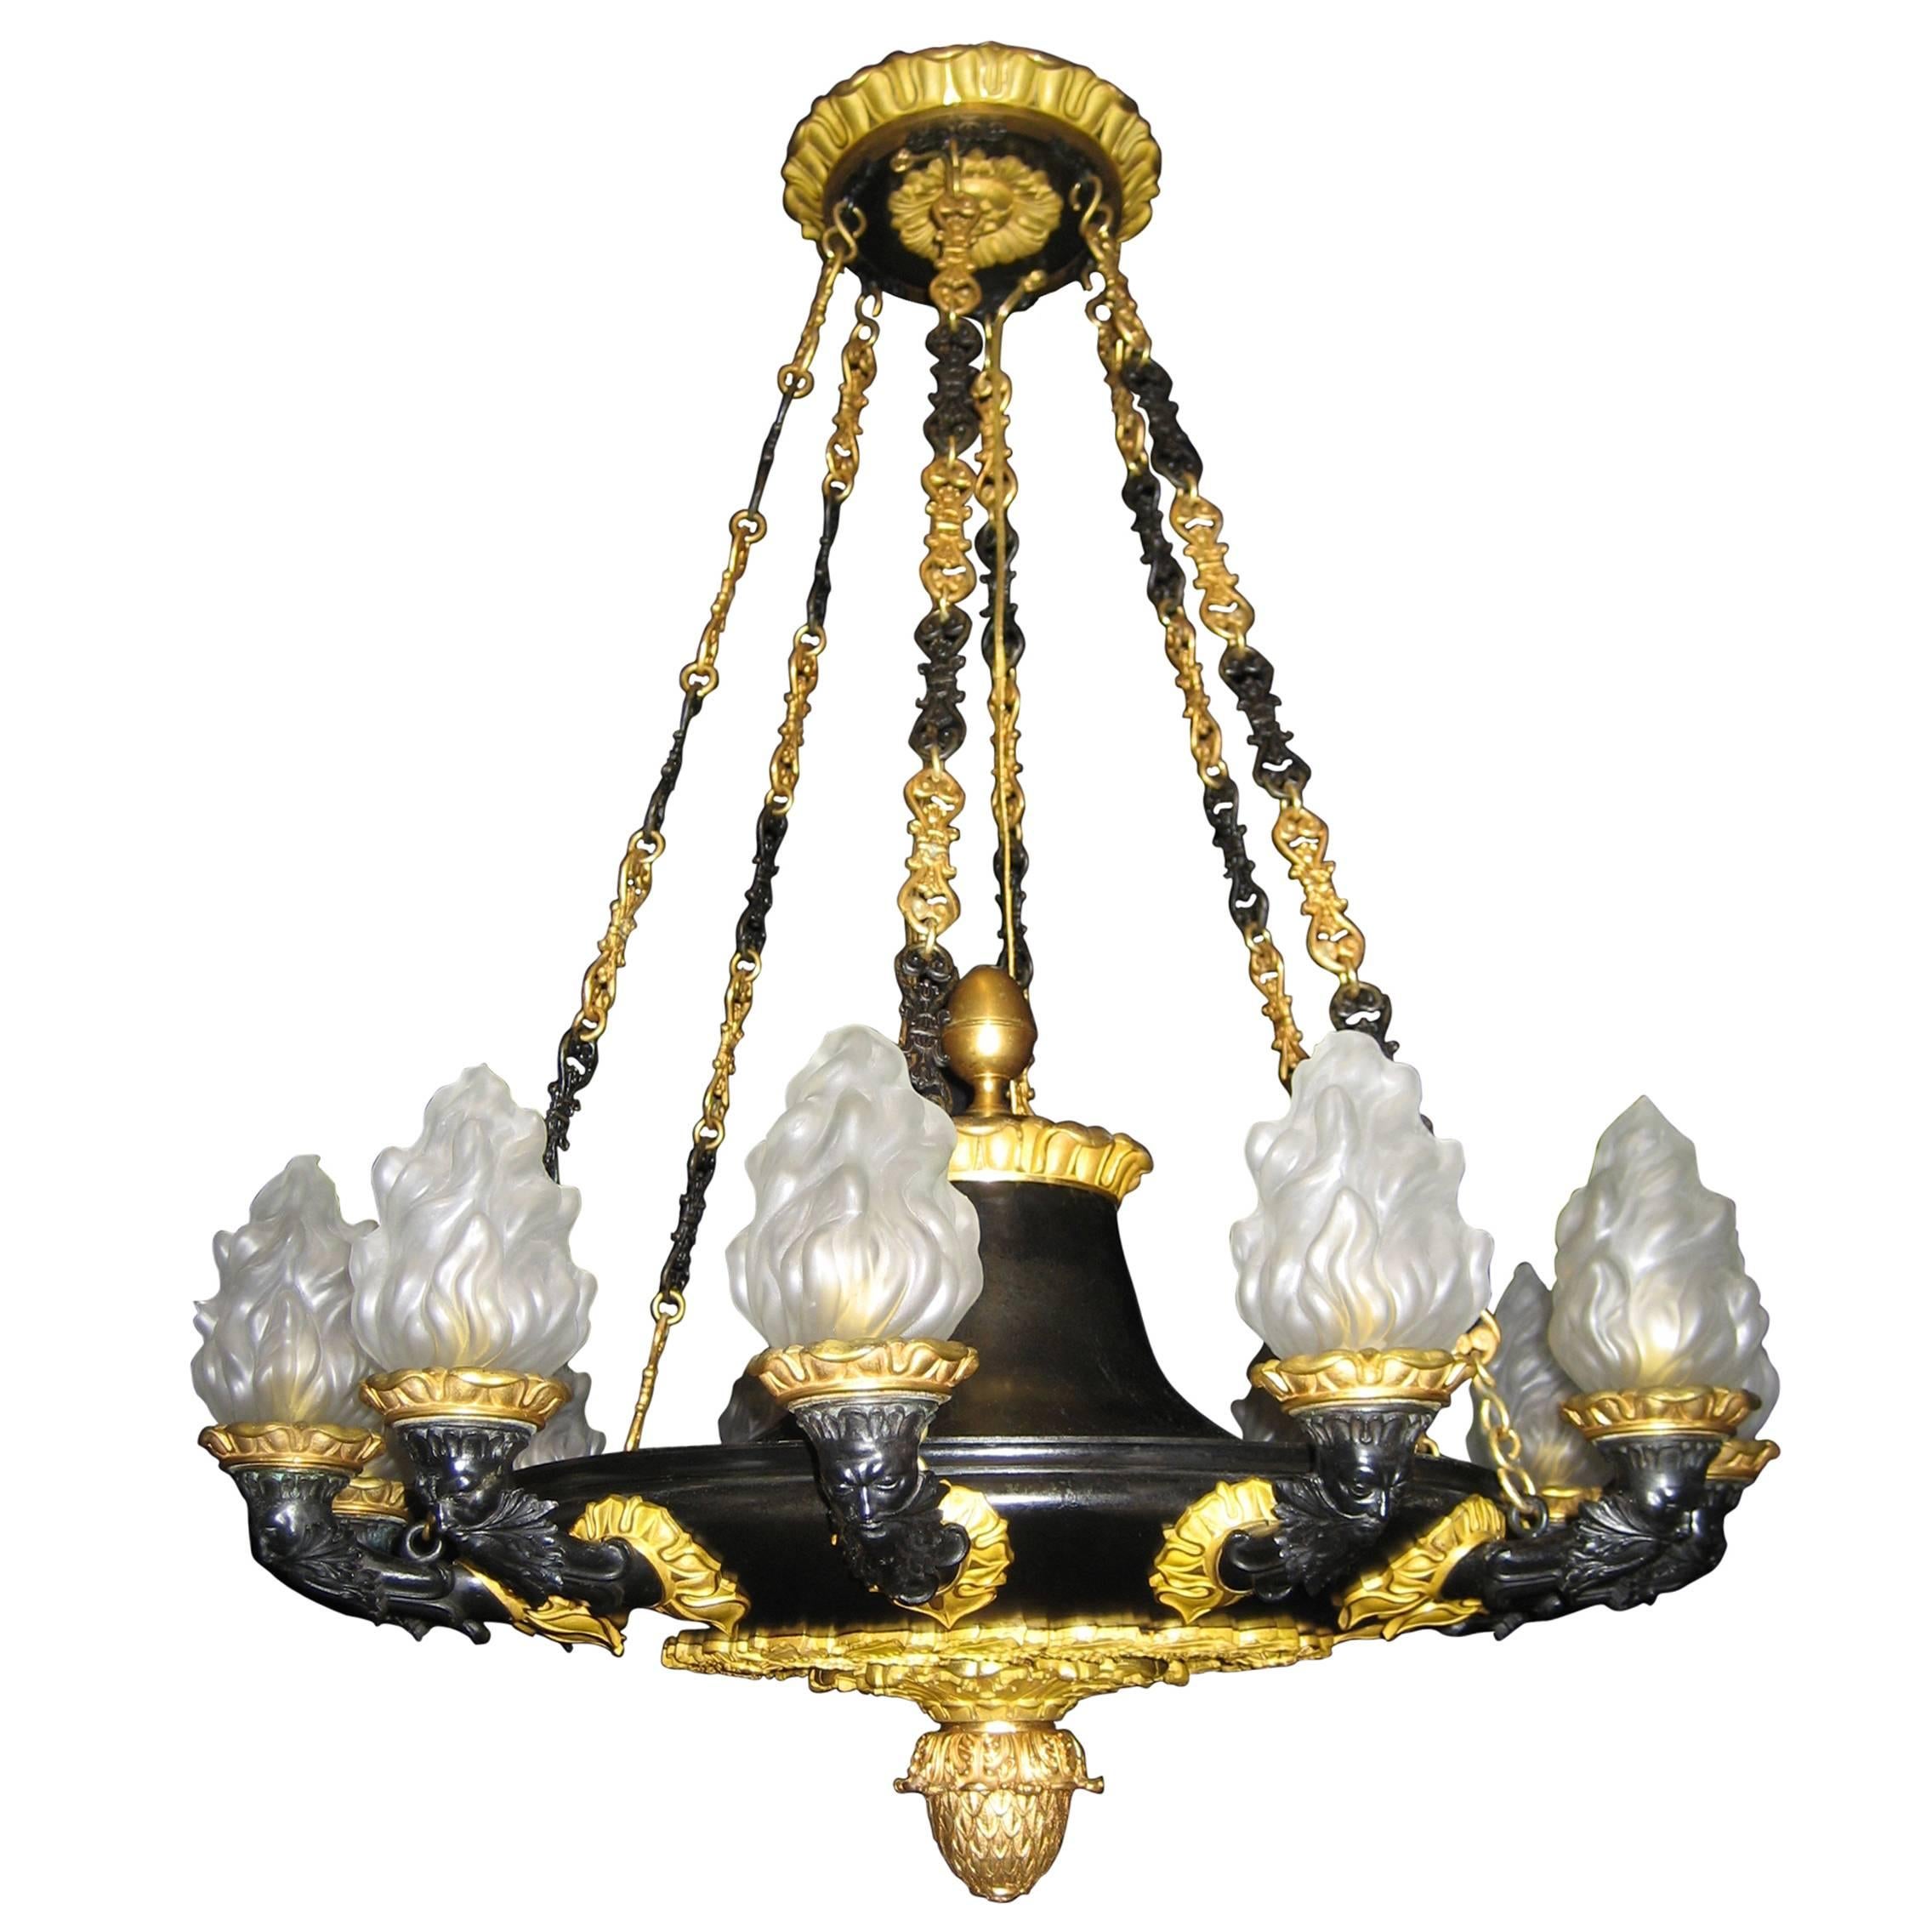 Spectacular Neoclassical Antique French Empire Style Gilt Bronze Chandelier